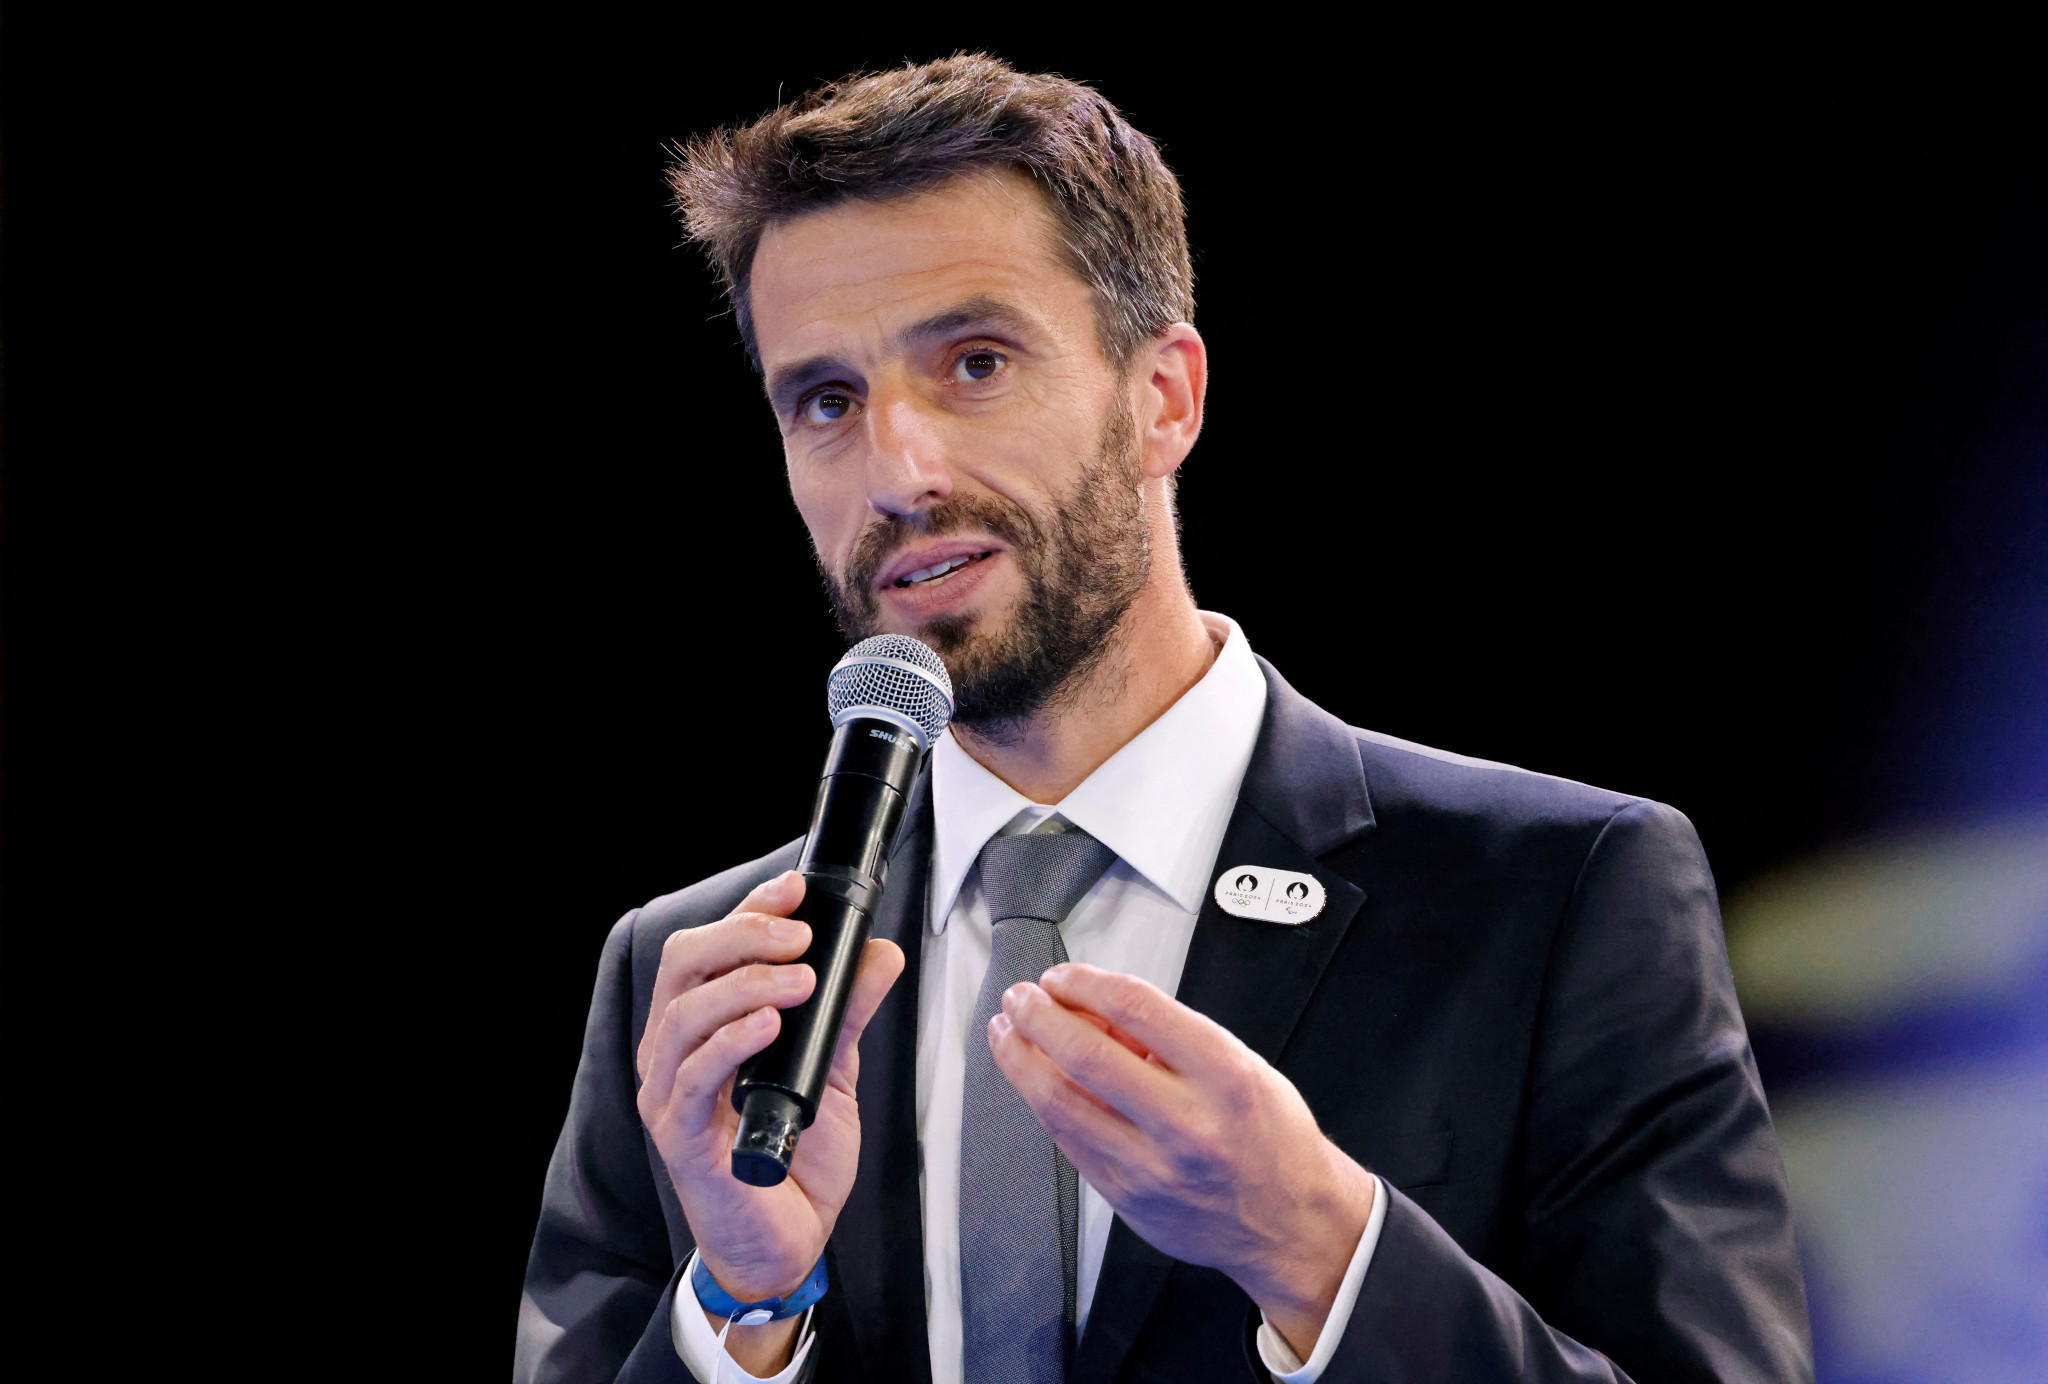 Estanguet asks Lambert-led Audit Committee to map Paris 2024 risks, with 2022 "a pivotal year"